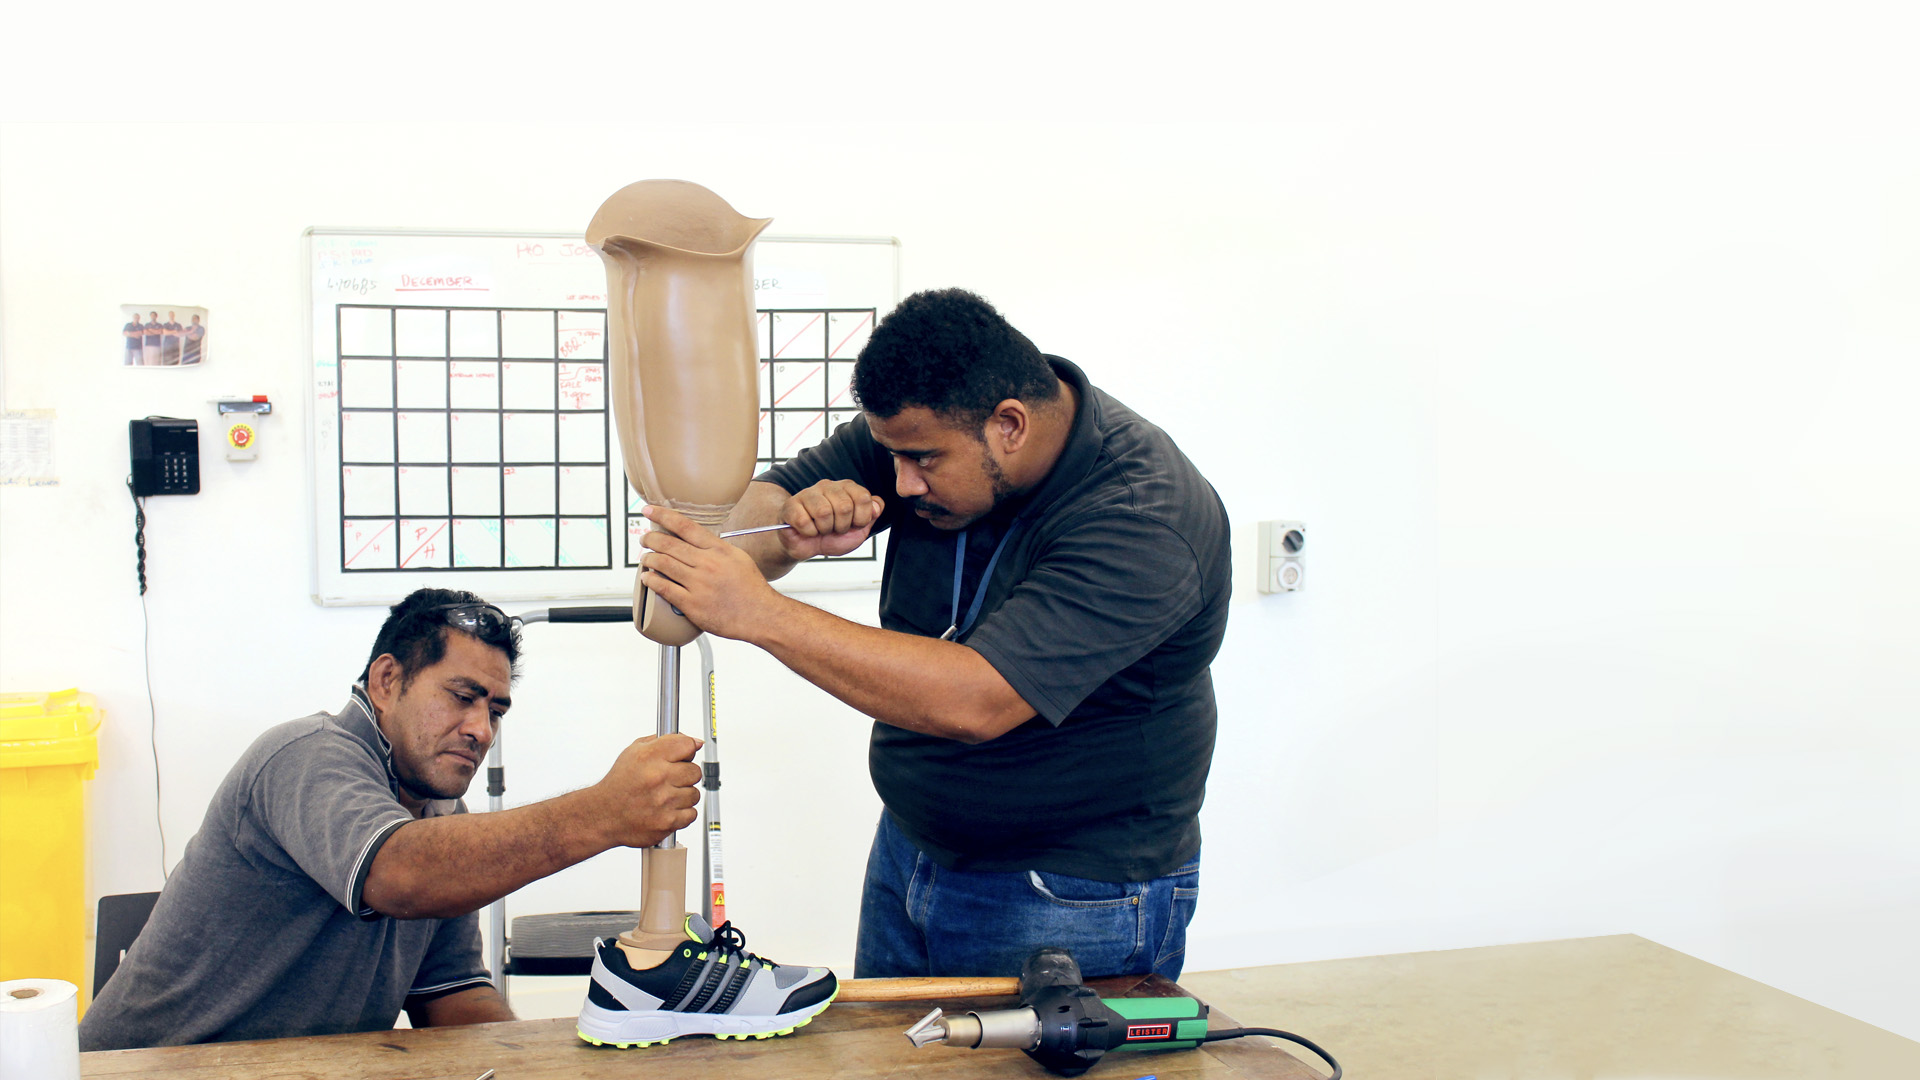 Two men work together to make an adjustment to a prosthetic leg placed upon a workbench. One man sits holding the leg while the other stands, working on it with a tool. Both look very focused.